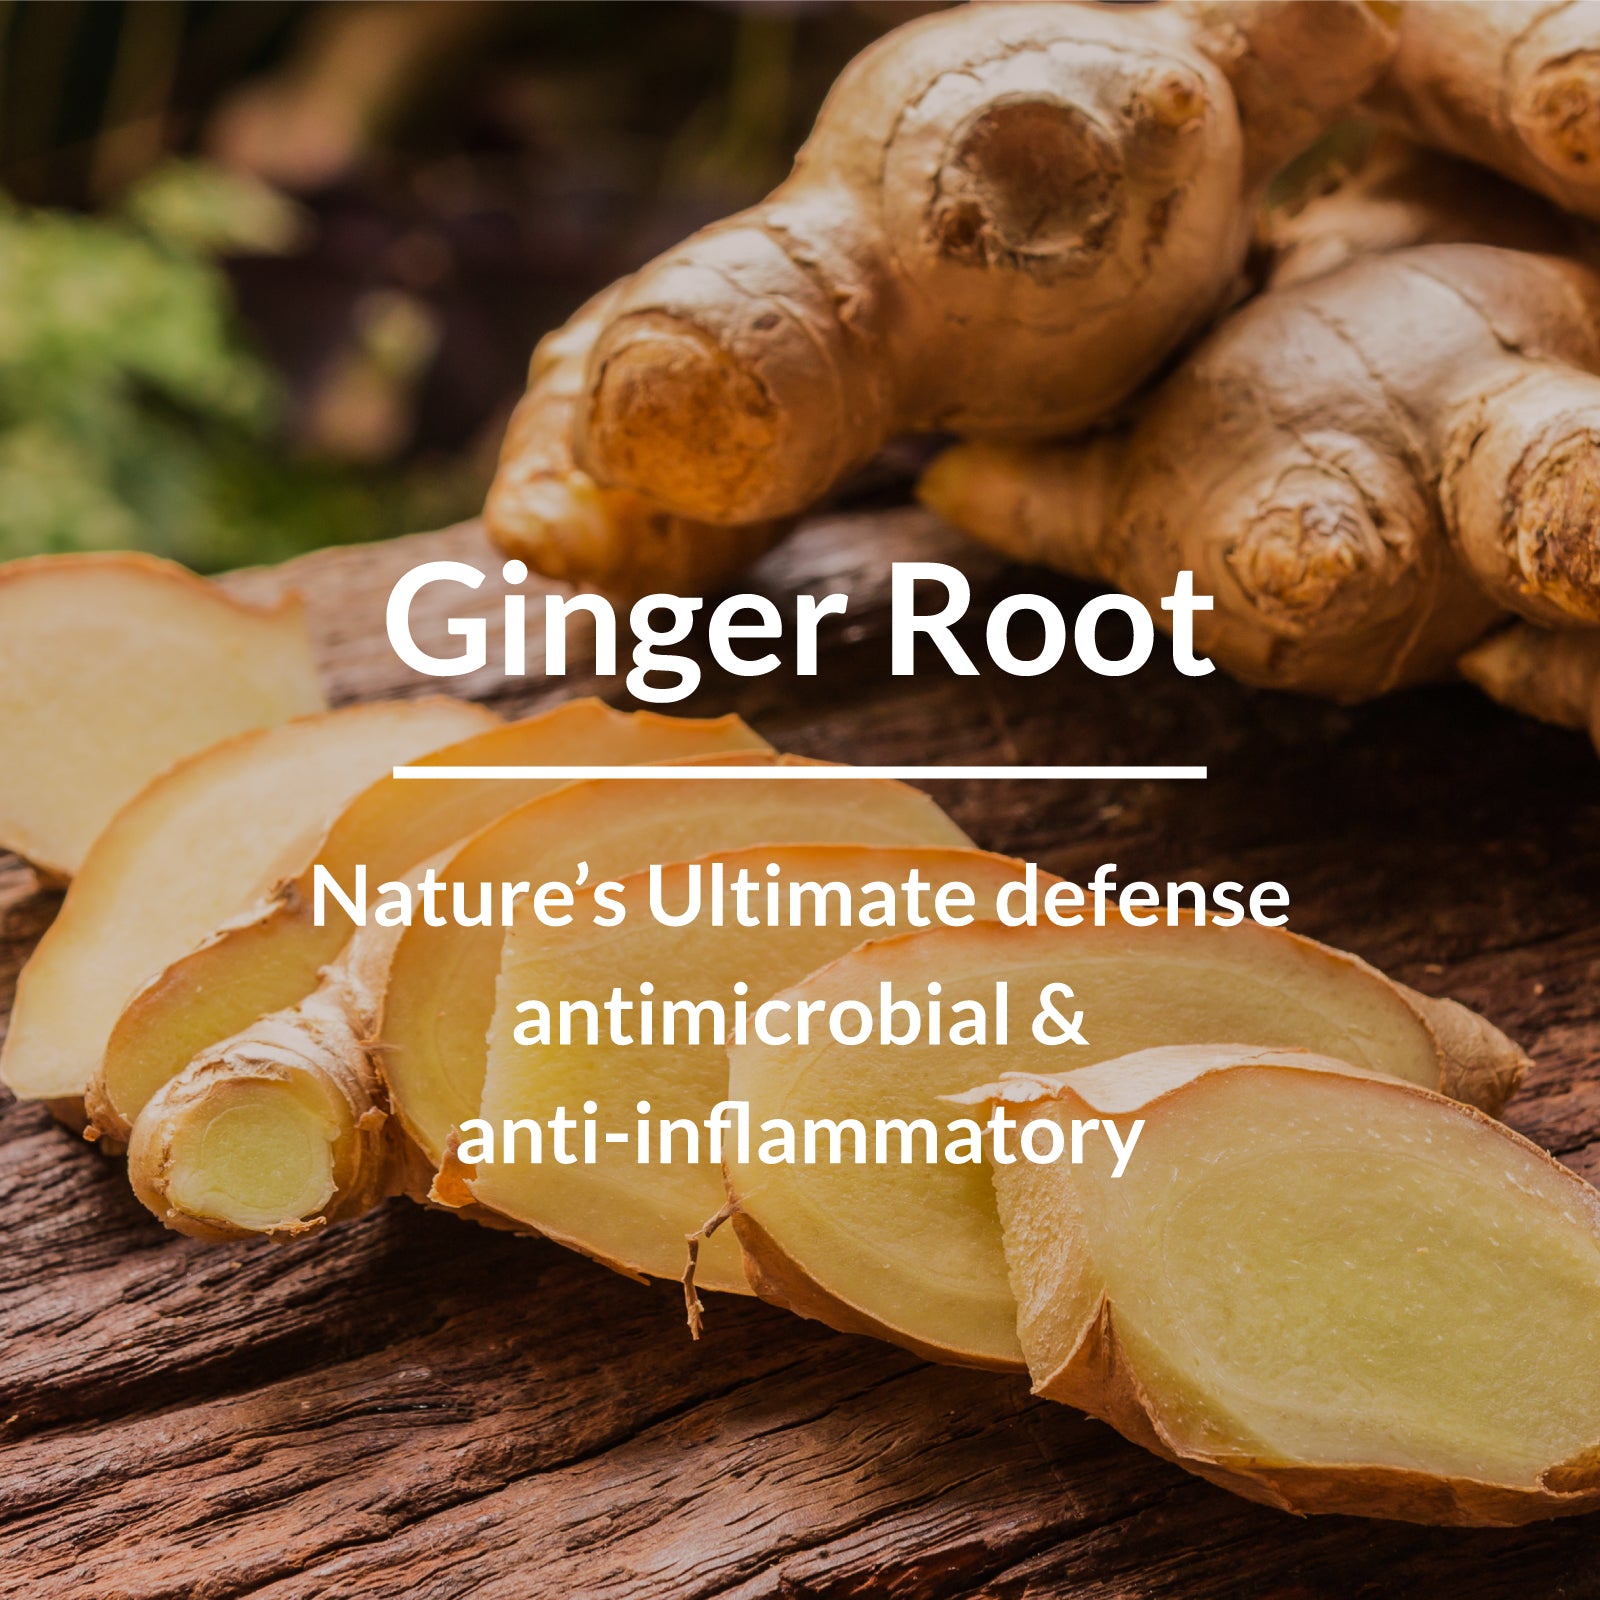 Ginger Root Dandruff-Control Shampoo - Natural Anti-Dandruff Treatment for Healthy Scalp and Hair